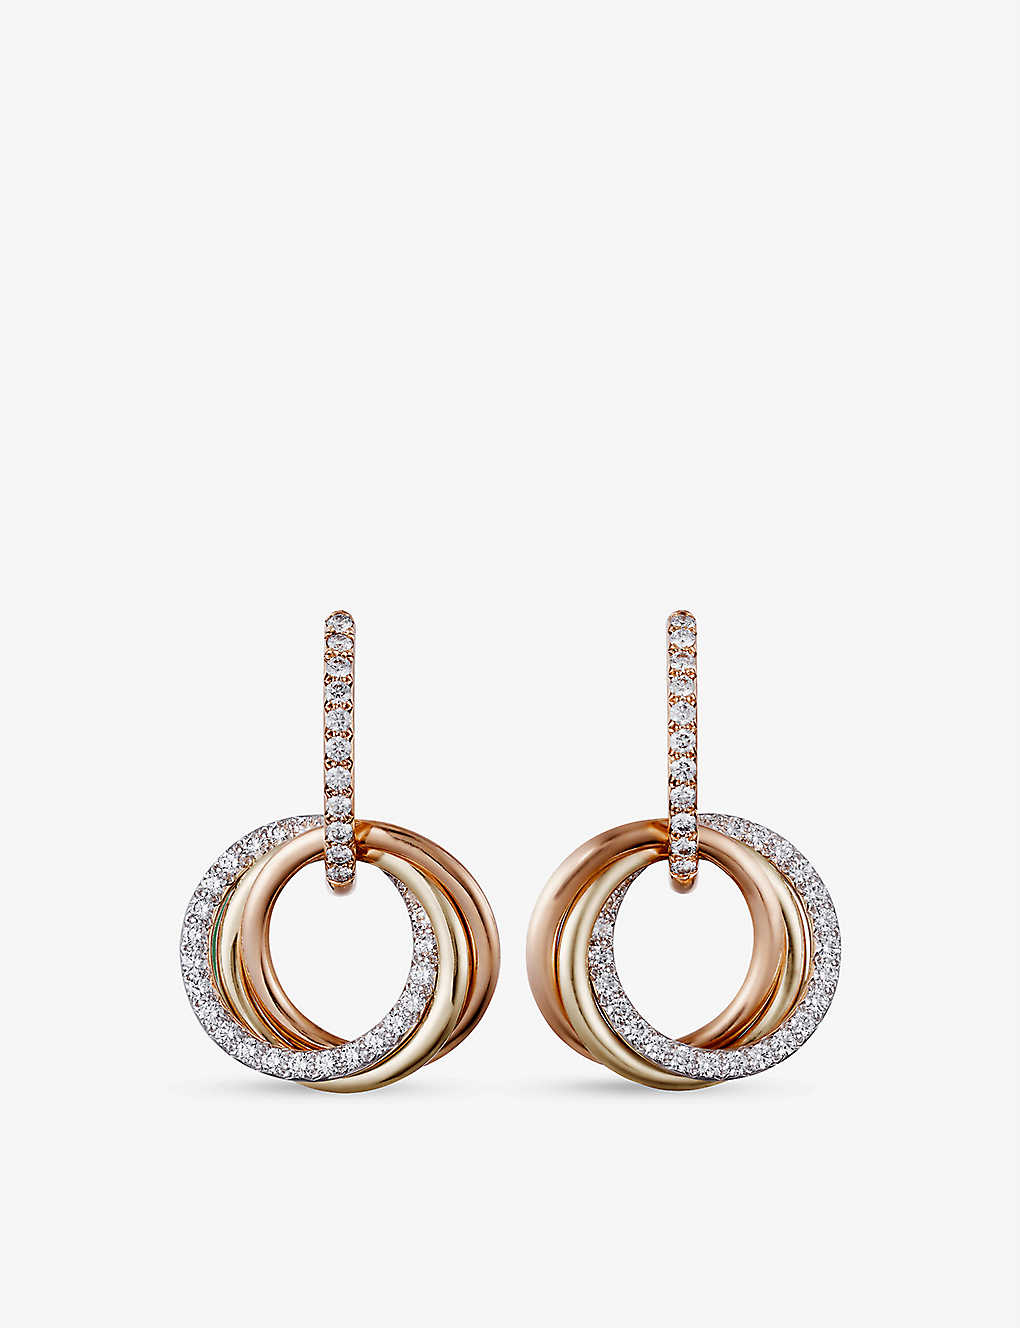 Cartier White, Yellow, Rose Gold And Diamond Trinity Earrings In Tri-gold